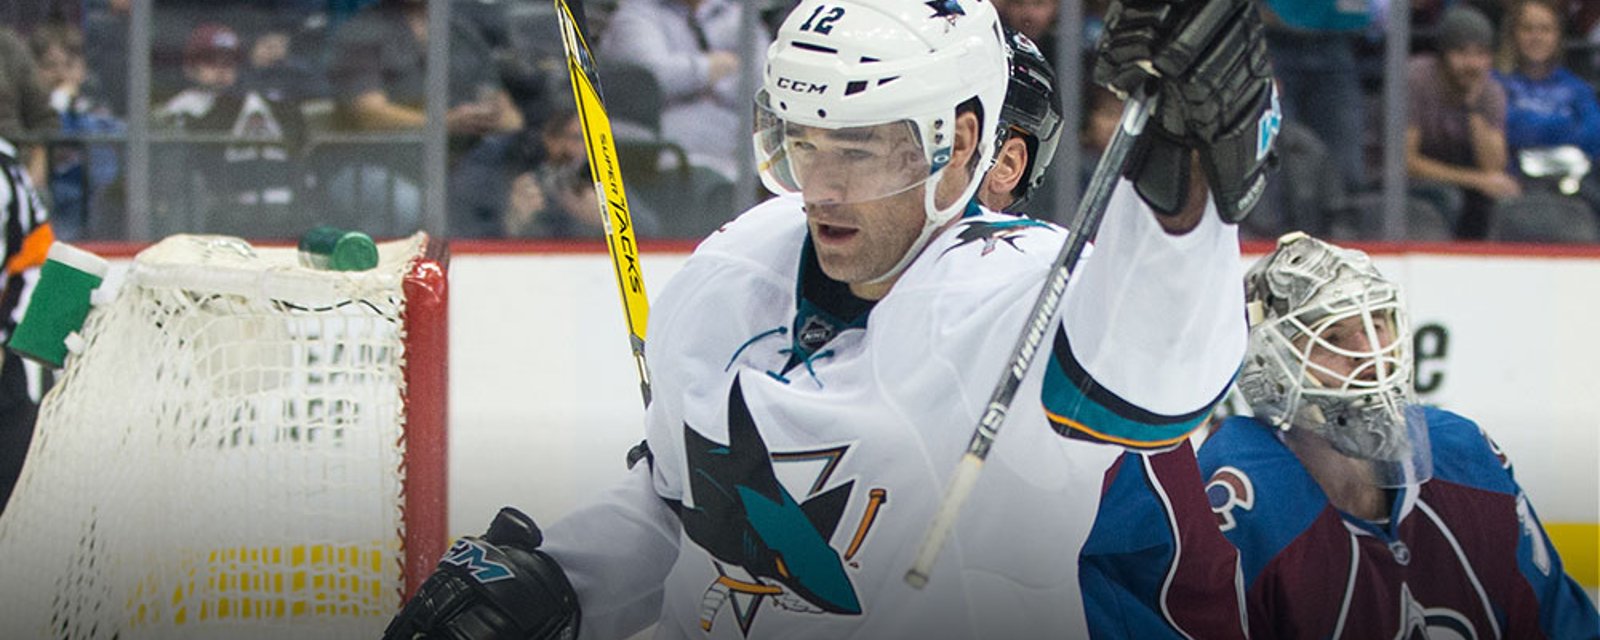 Report: Marleau replacement plan in place for Sharks